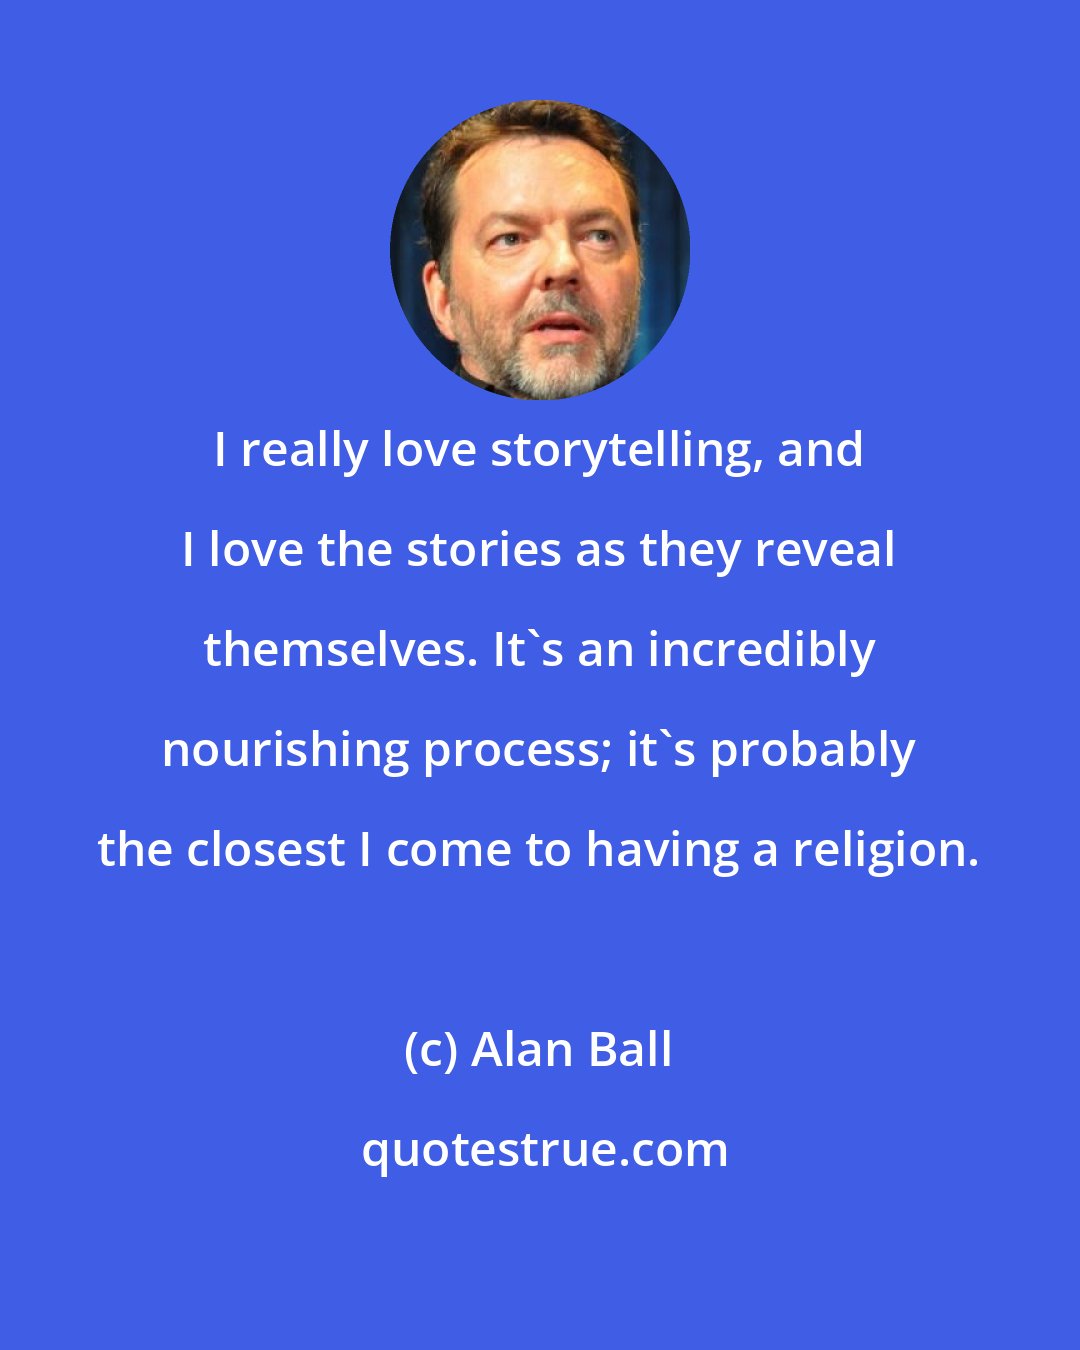 Alan Ball: I really love storytelling, and I love the stories as they reveal themselves. It's an incredibly nourishing process; it's probably the closest I come to having a religion.